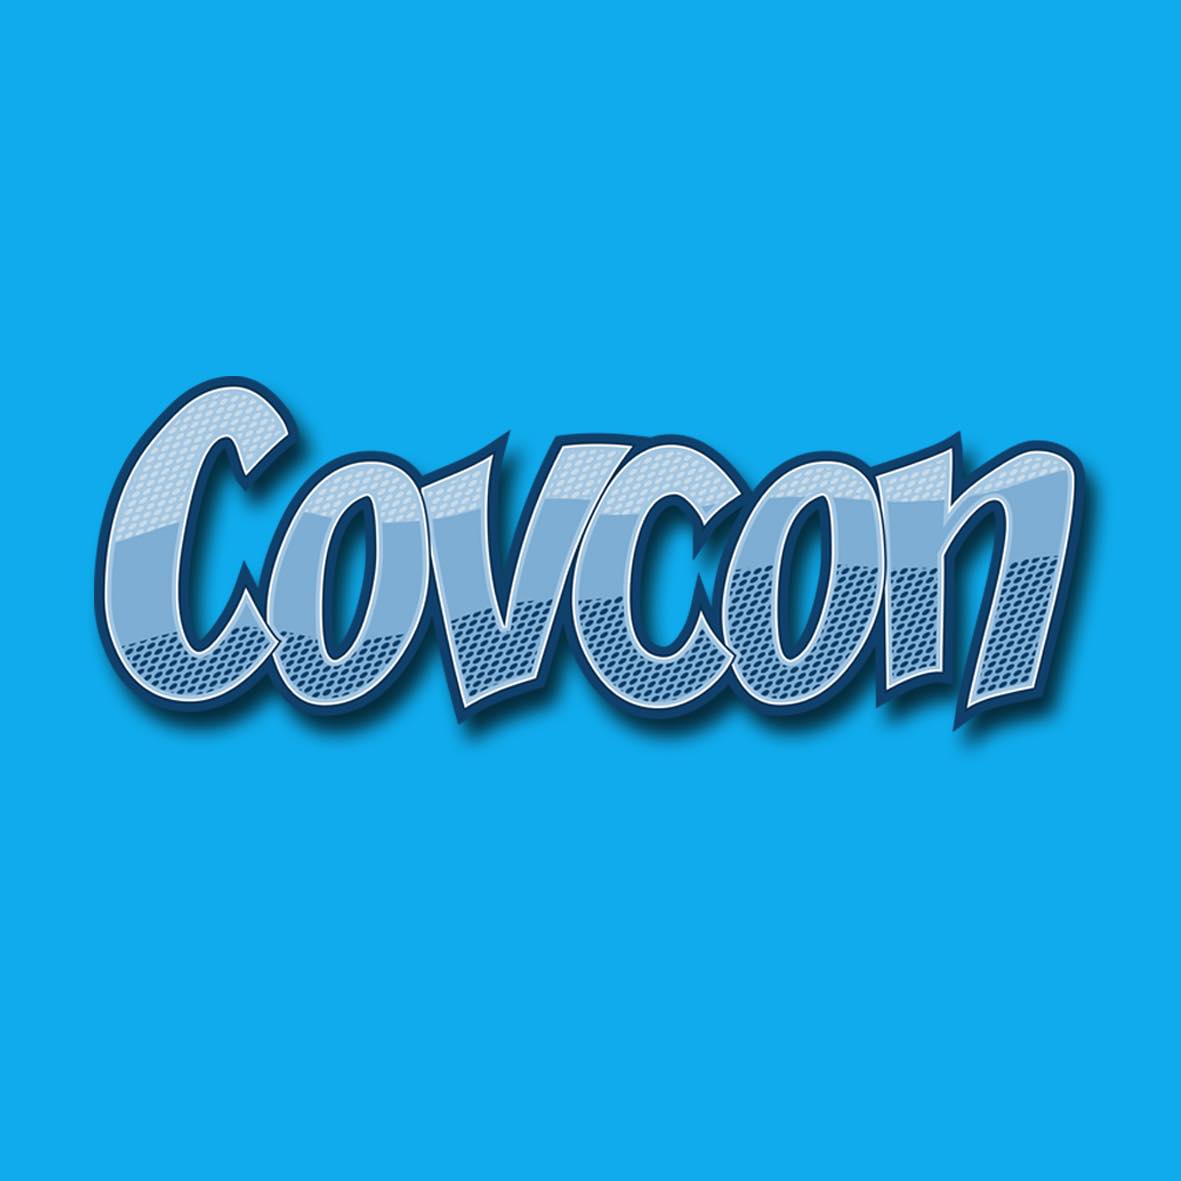 Featured image for “CONVENTION REVIEW : COVCON 2022”Featured image for “CONVENTION REVIEW : COVCON 2022”